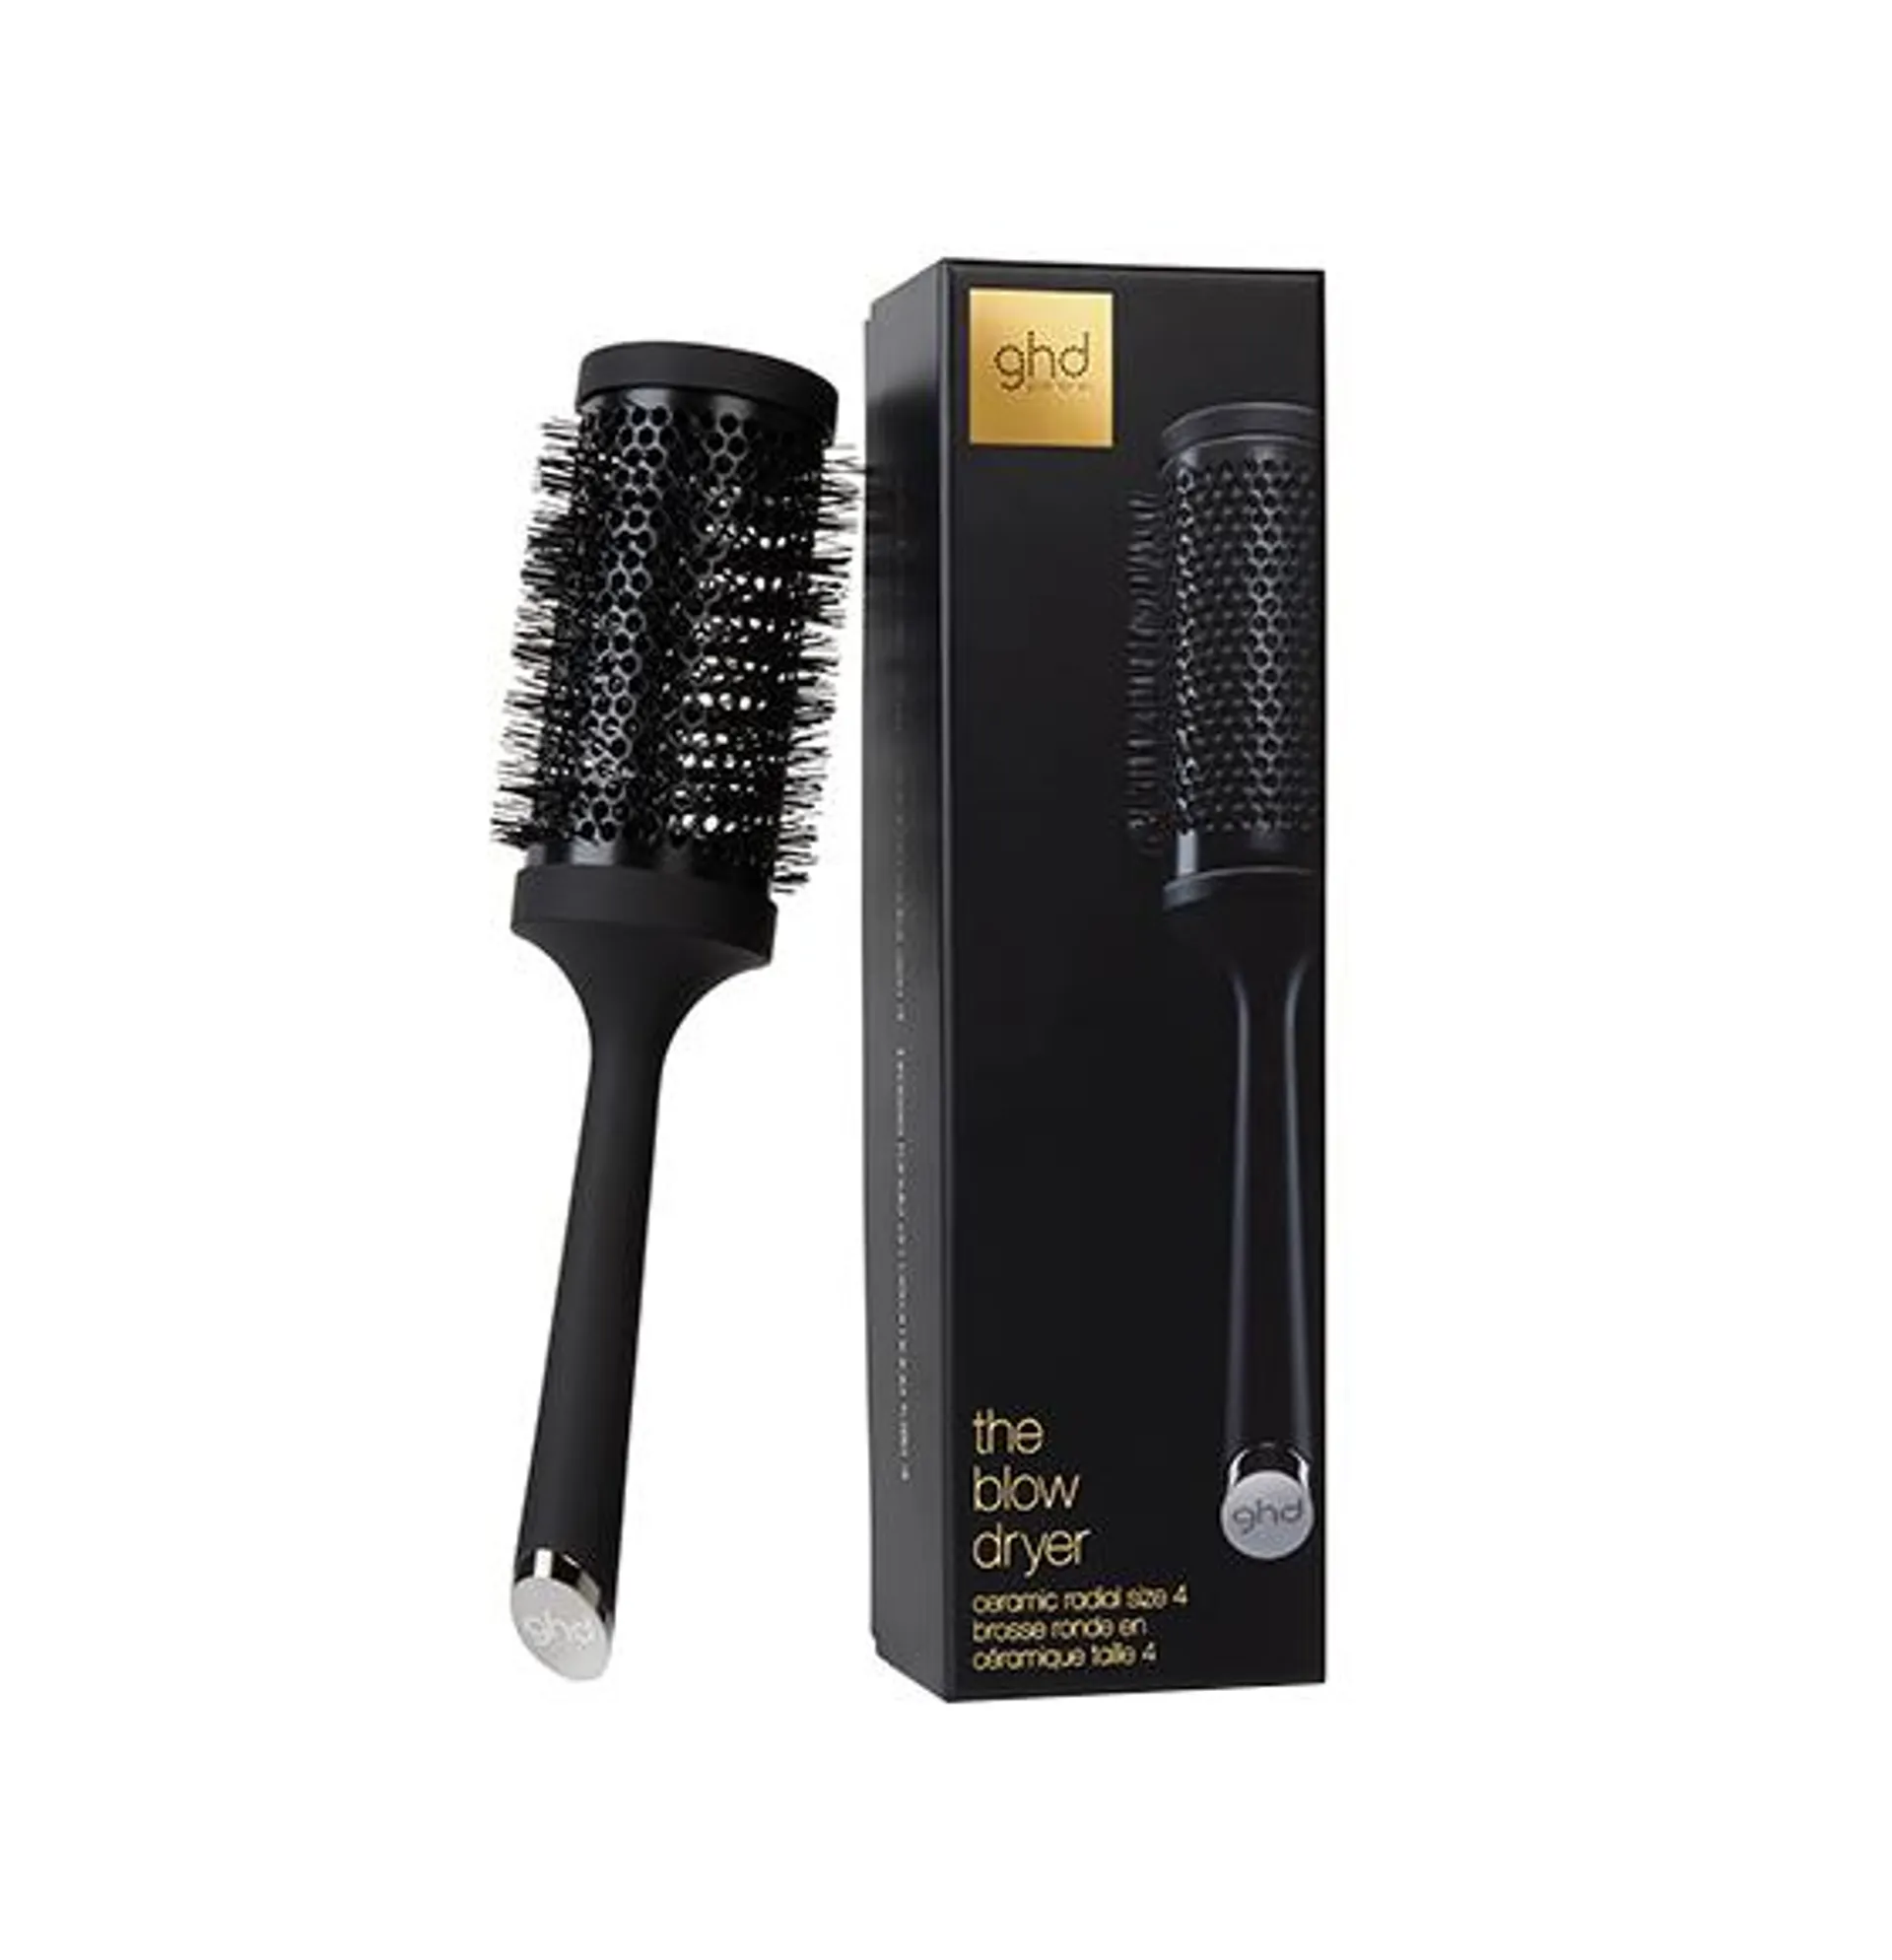 ghd The Blow Dryer Brush Size 4